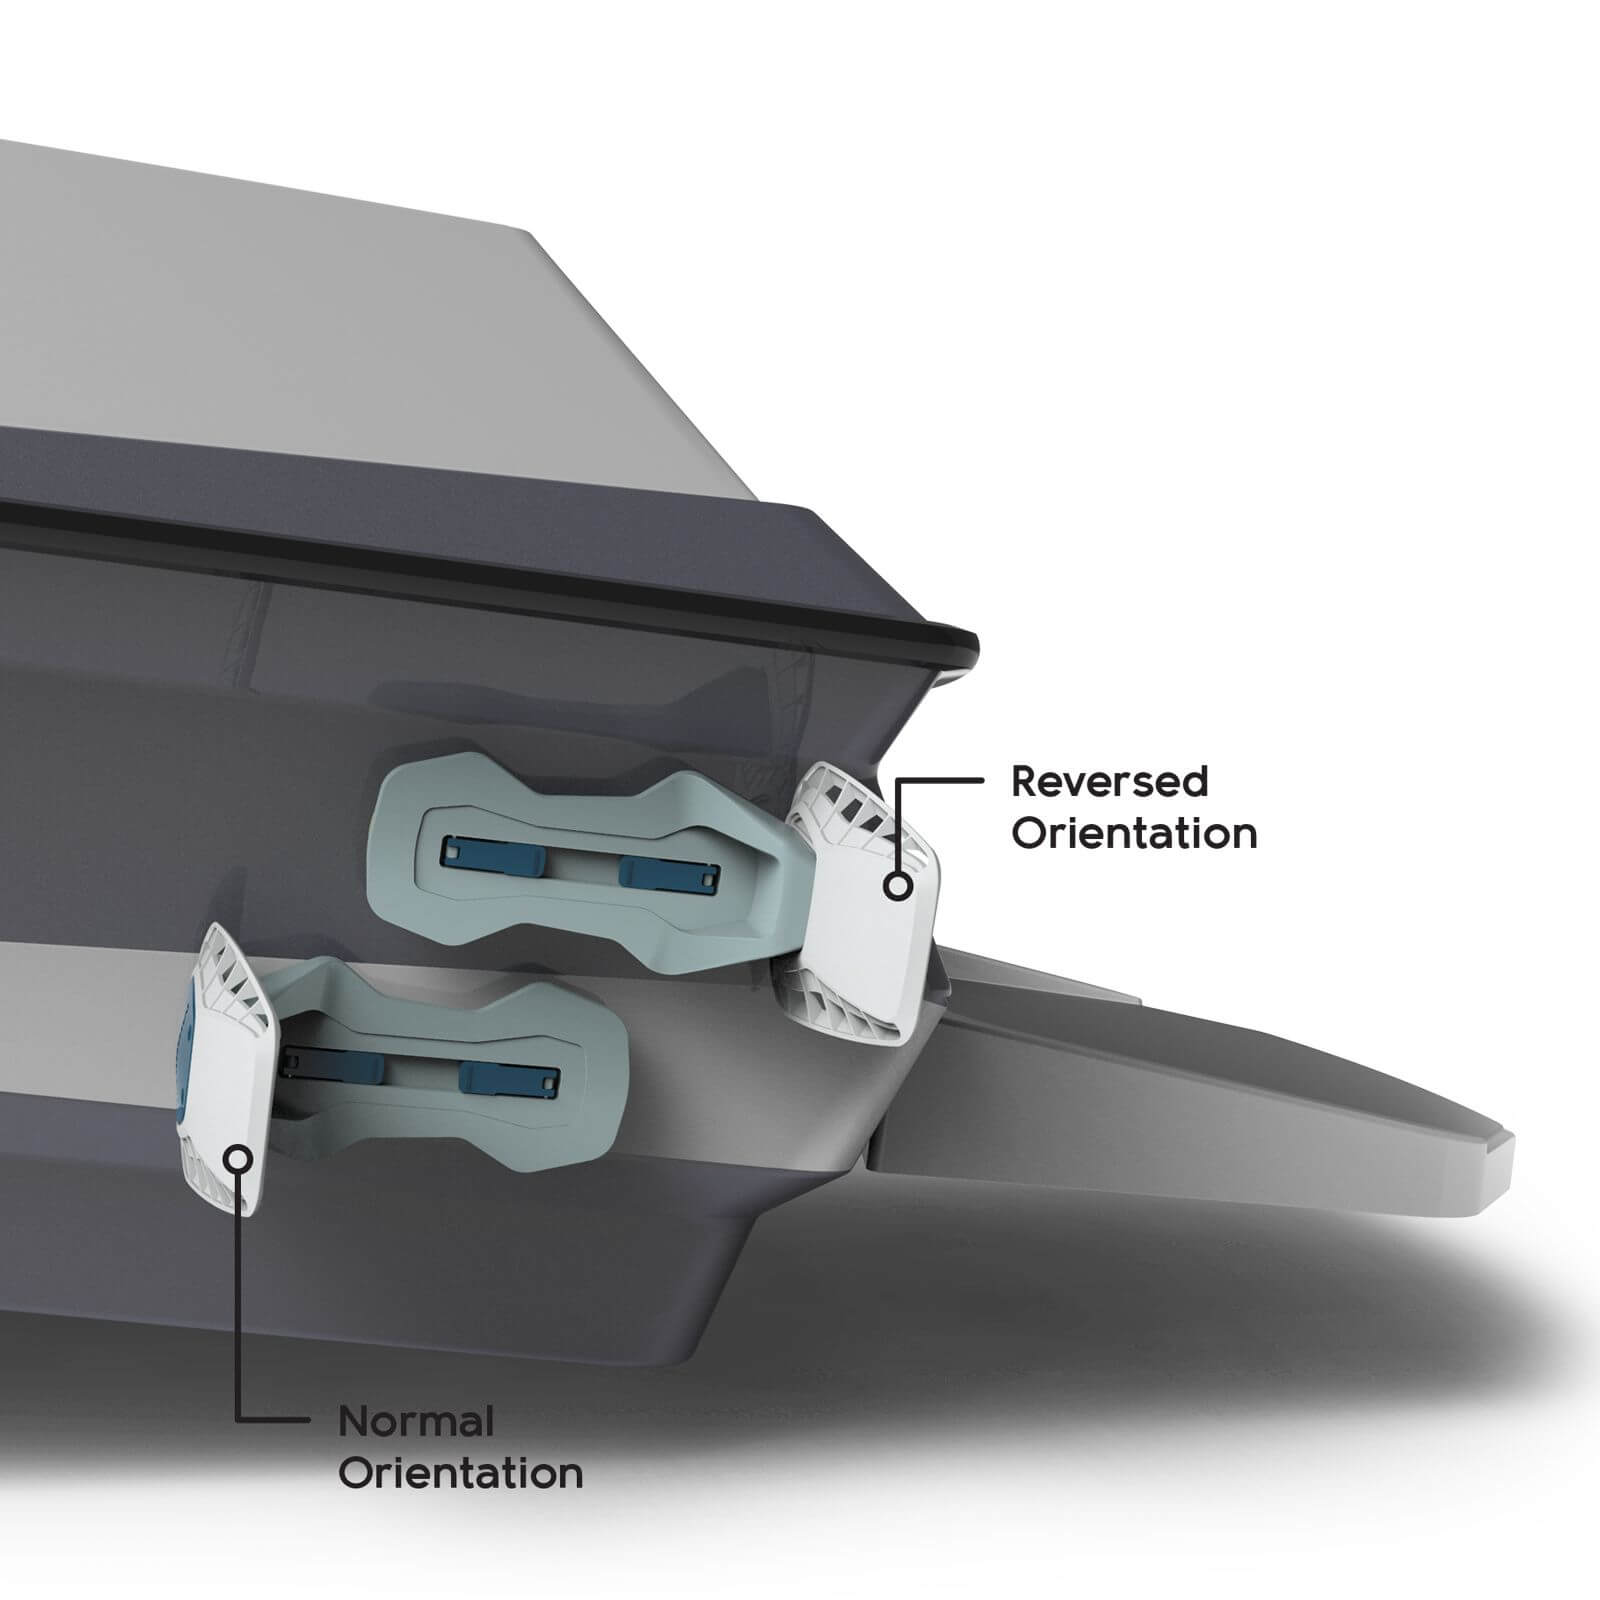 A diagram illustrating the components of the MISSION Delta 2.0 Wakesurf Shaper, utilizing suction-based RipFlow Technology. The diagram is designed to provide an easy-to-understand visual representation of the various parts and their functions, particularly for MISSION.